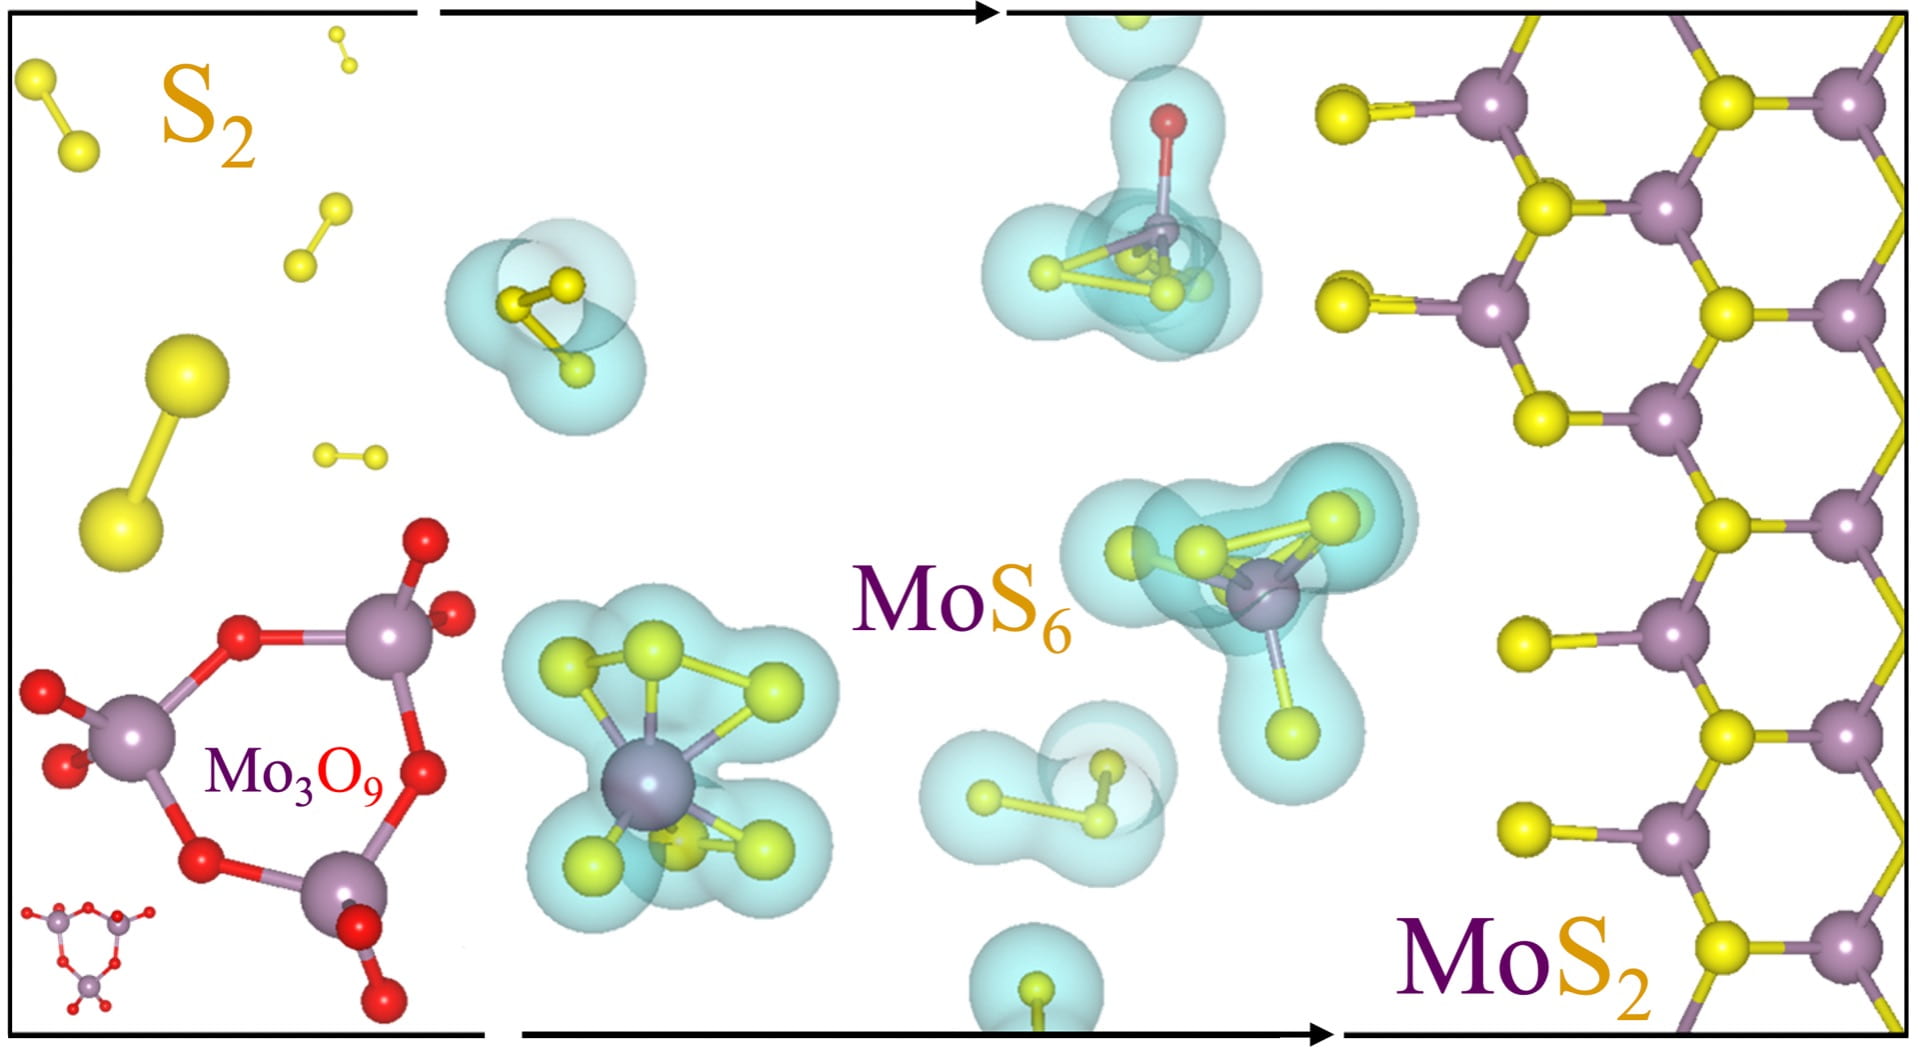 Three gas-phase molecules react at high temperatures during chemical vapor deposition to form molybdenum disulfide